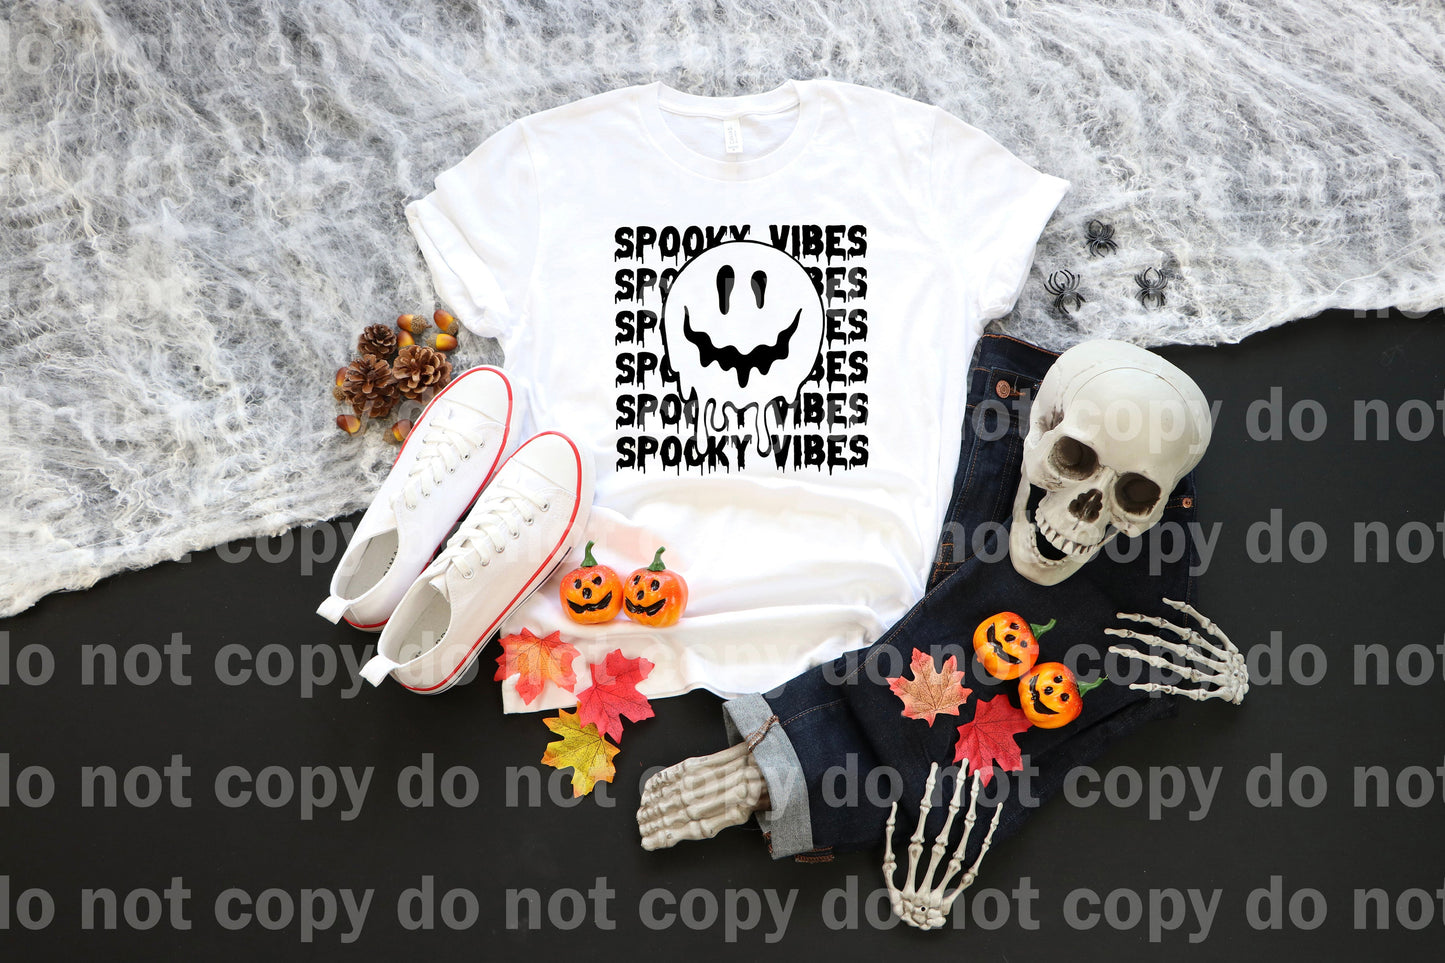 Spooky Vibes Stacked Drippy Smiley Full Color/One Color Dream Print or Sublimation Print